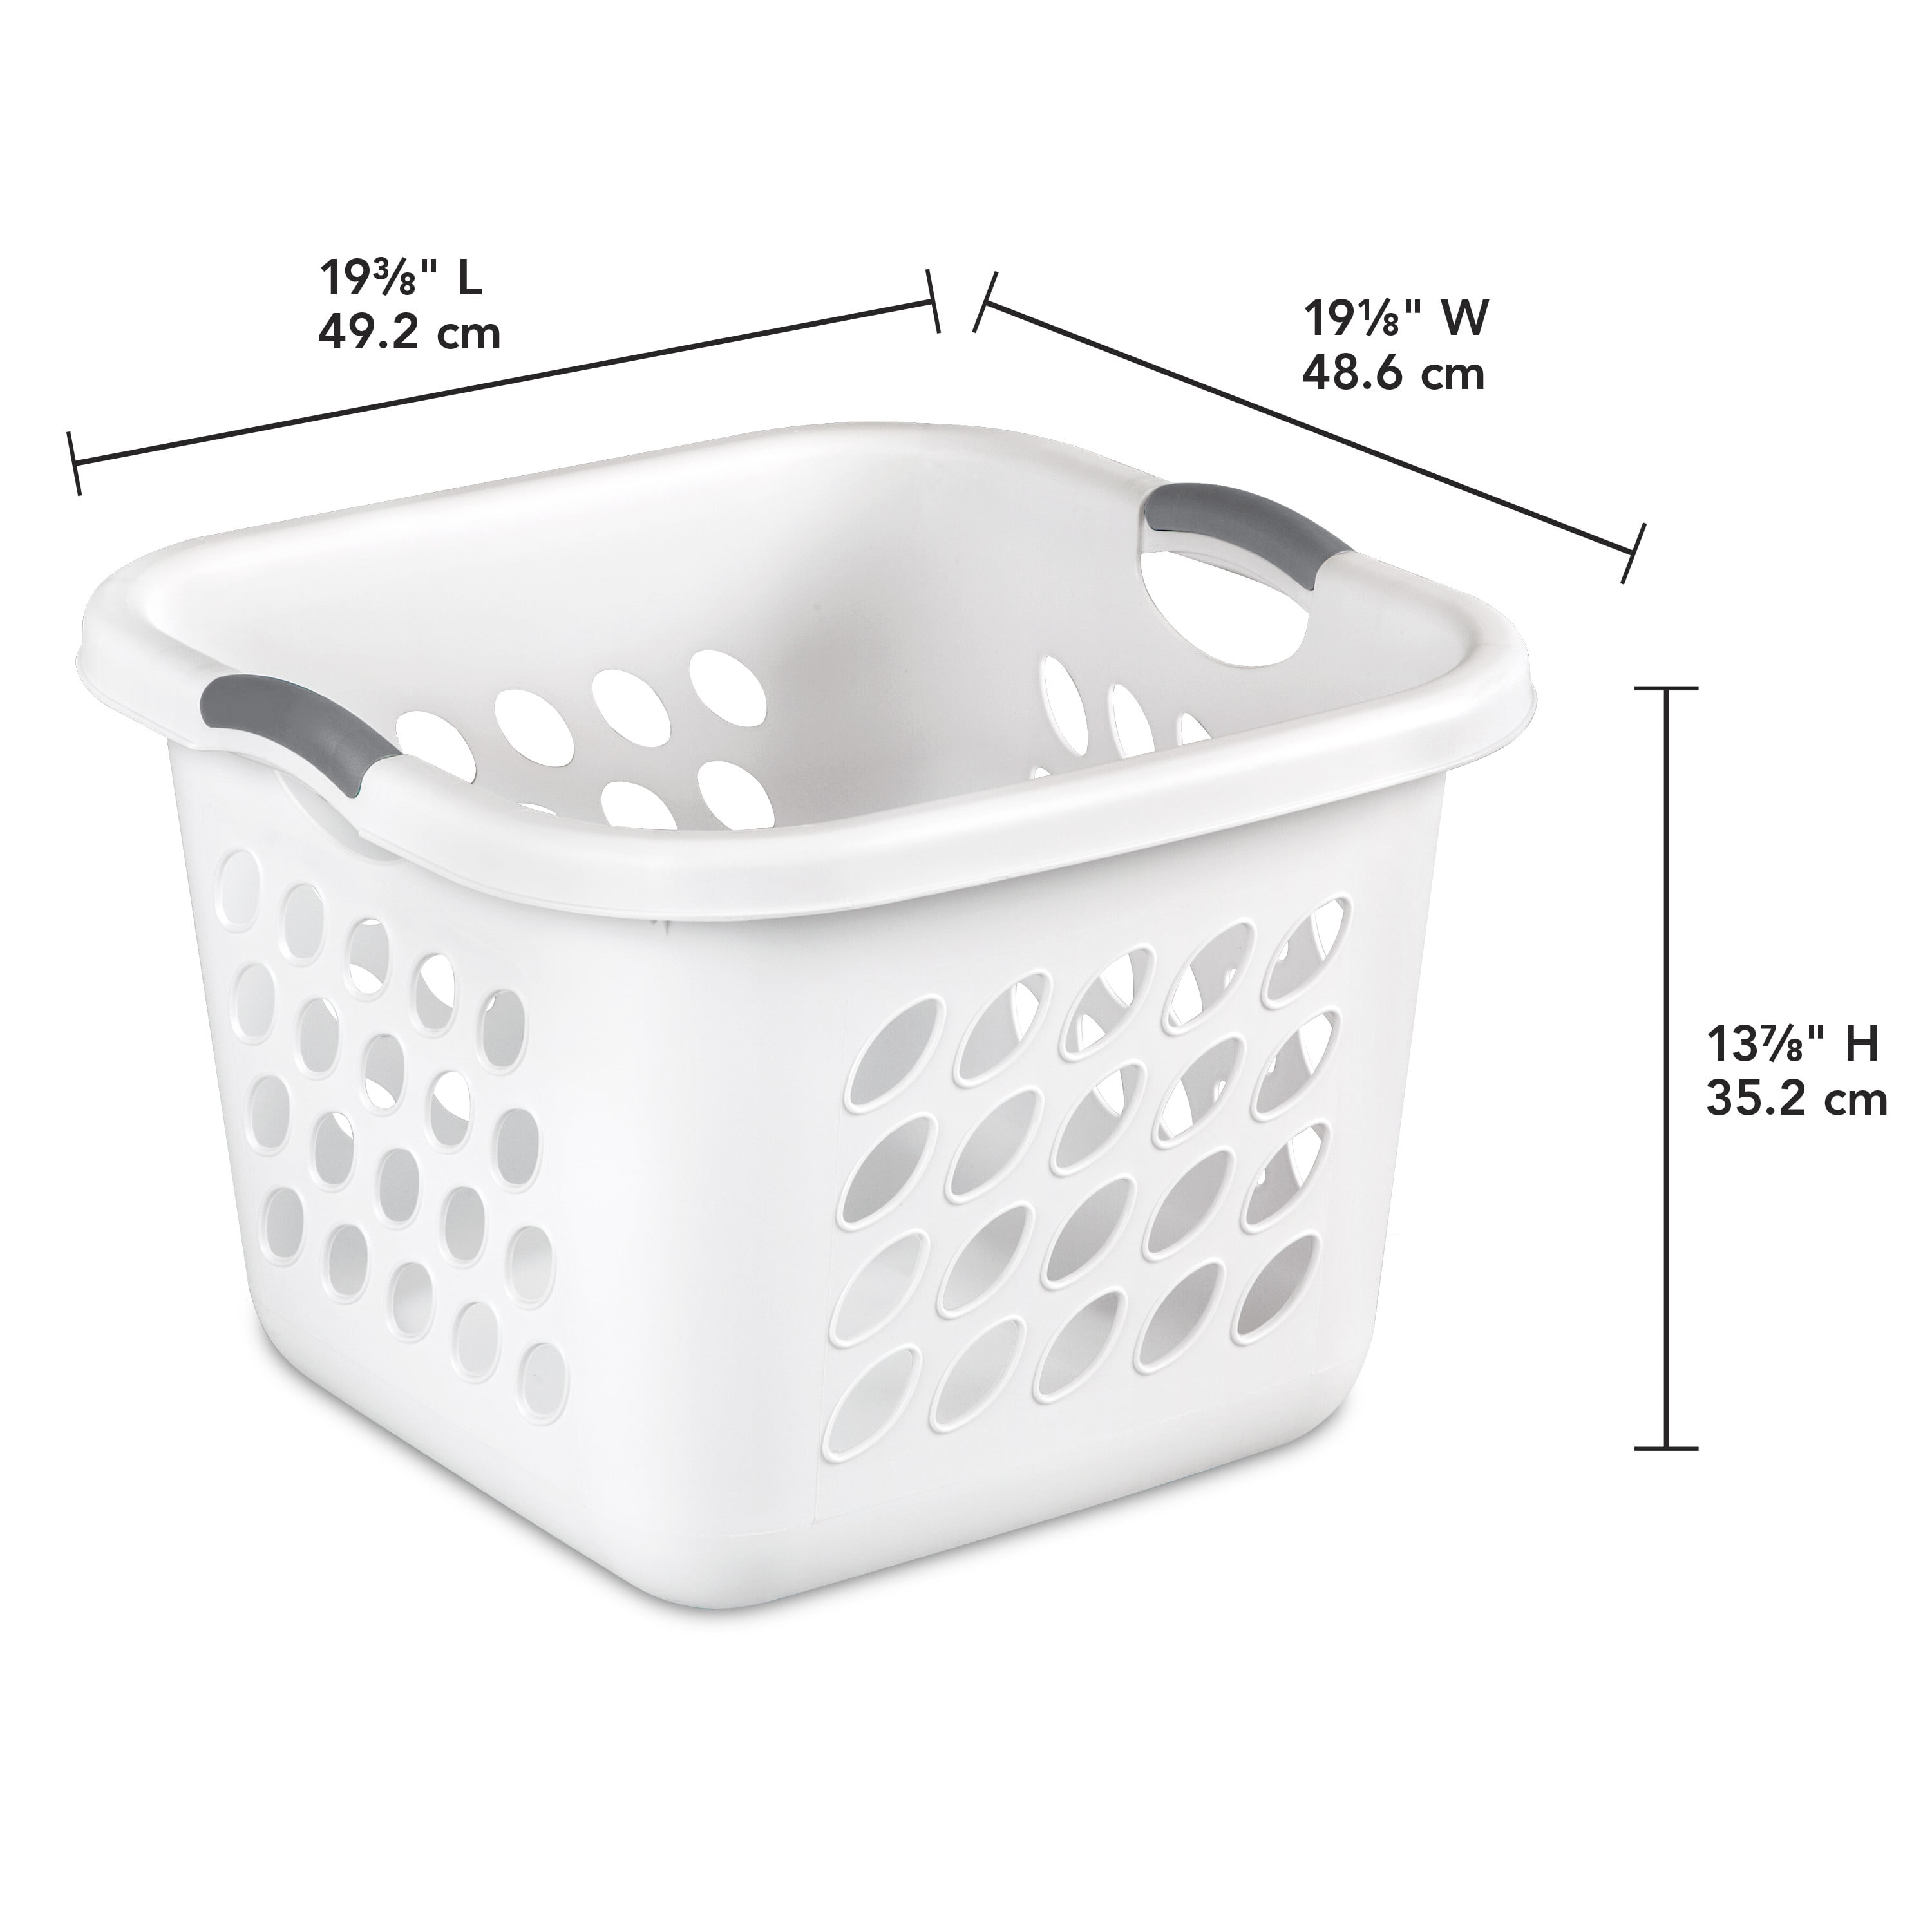 Collapsible Laundry Basket Tote Storage Bin 24 x 17 x 11 Carry and Store